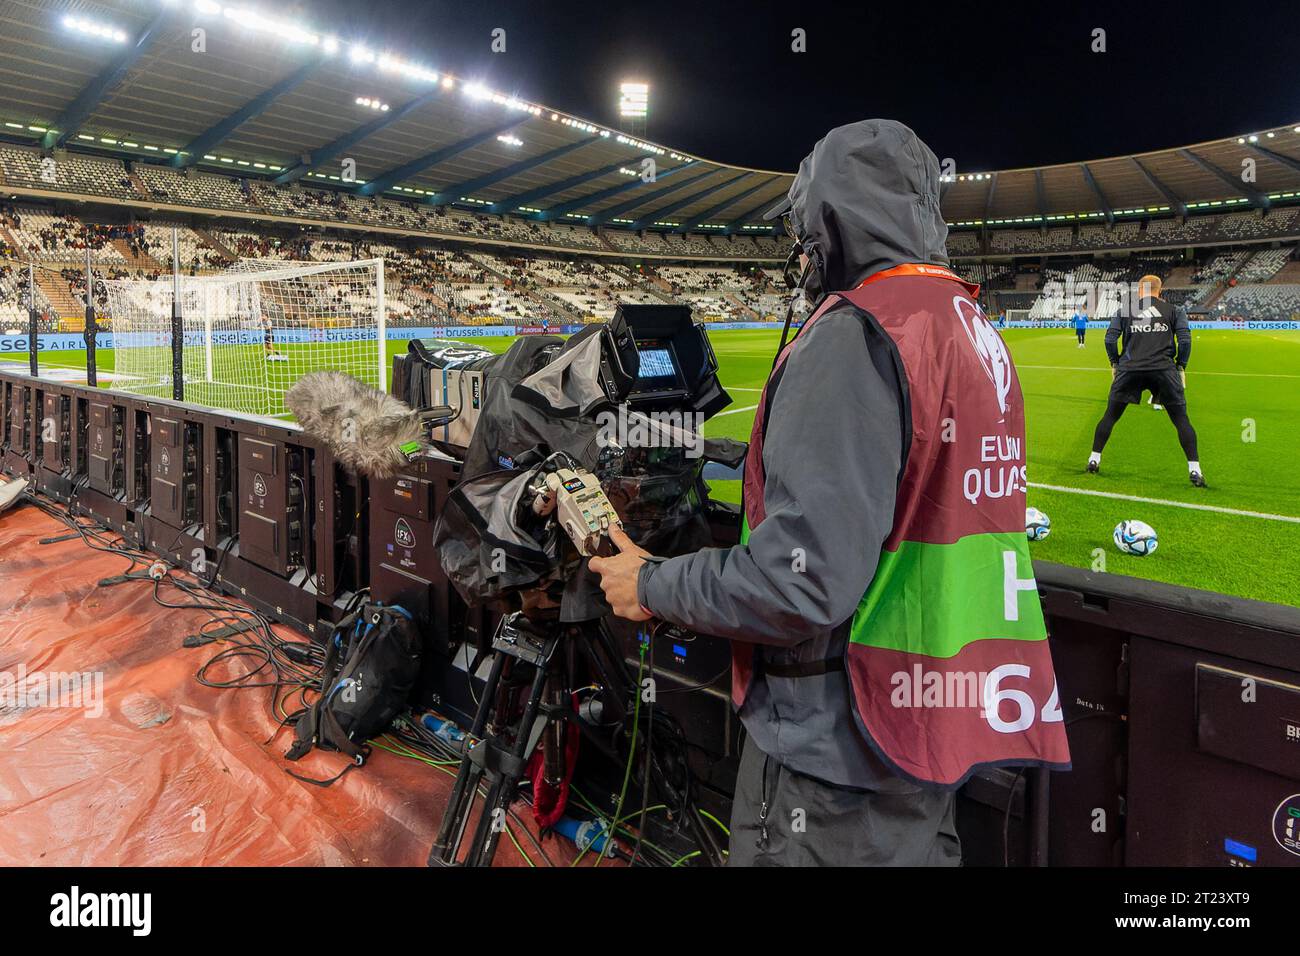 Brussels Belgium 16th Oct 2023 Brussels Belgium October 16 General Interior Overview With Television Camera Prior To The Group F Uefa Euro 2024 European Qualifiers Match Between Belgium And Sweden At King Baudouin Stadium On October 16 2023 In Brussels Belgium Photo By Joris Verwijstbsr Agency Credit Bsr Agencyalamy Live News 2T23XT9 